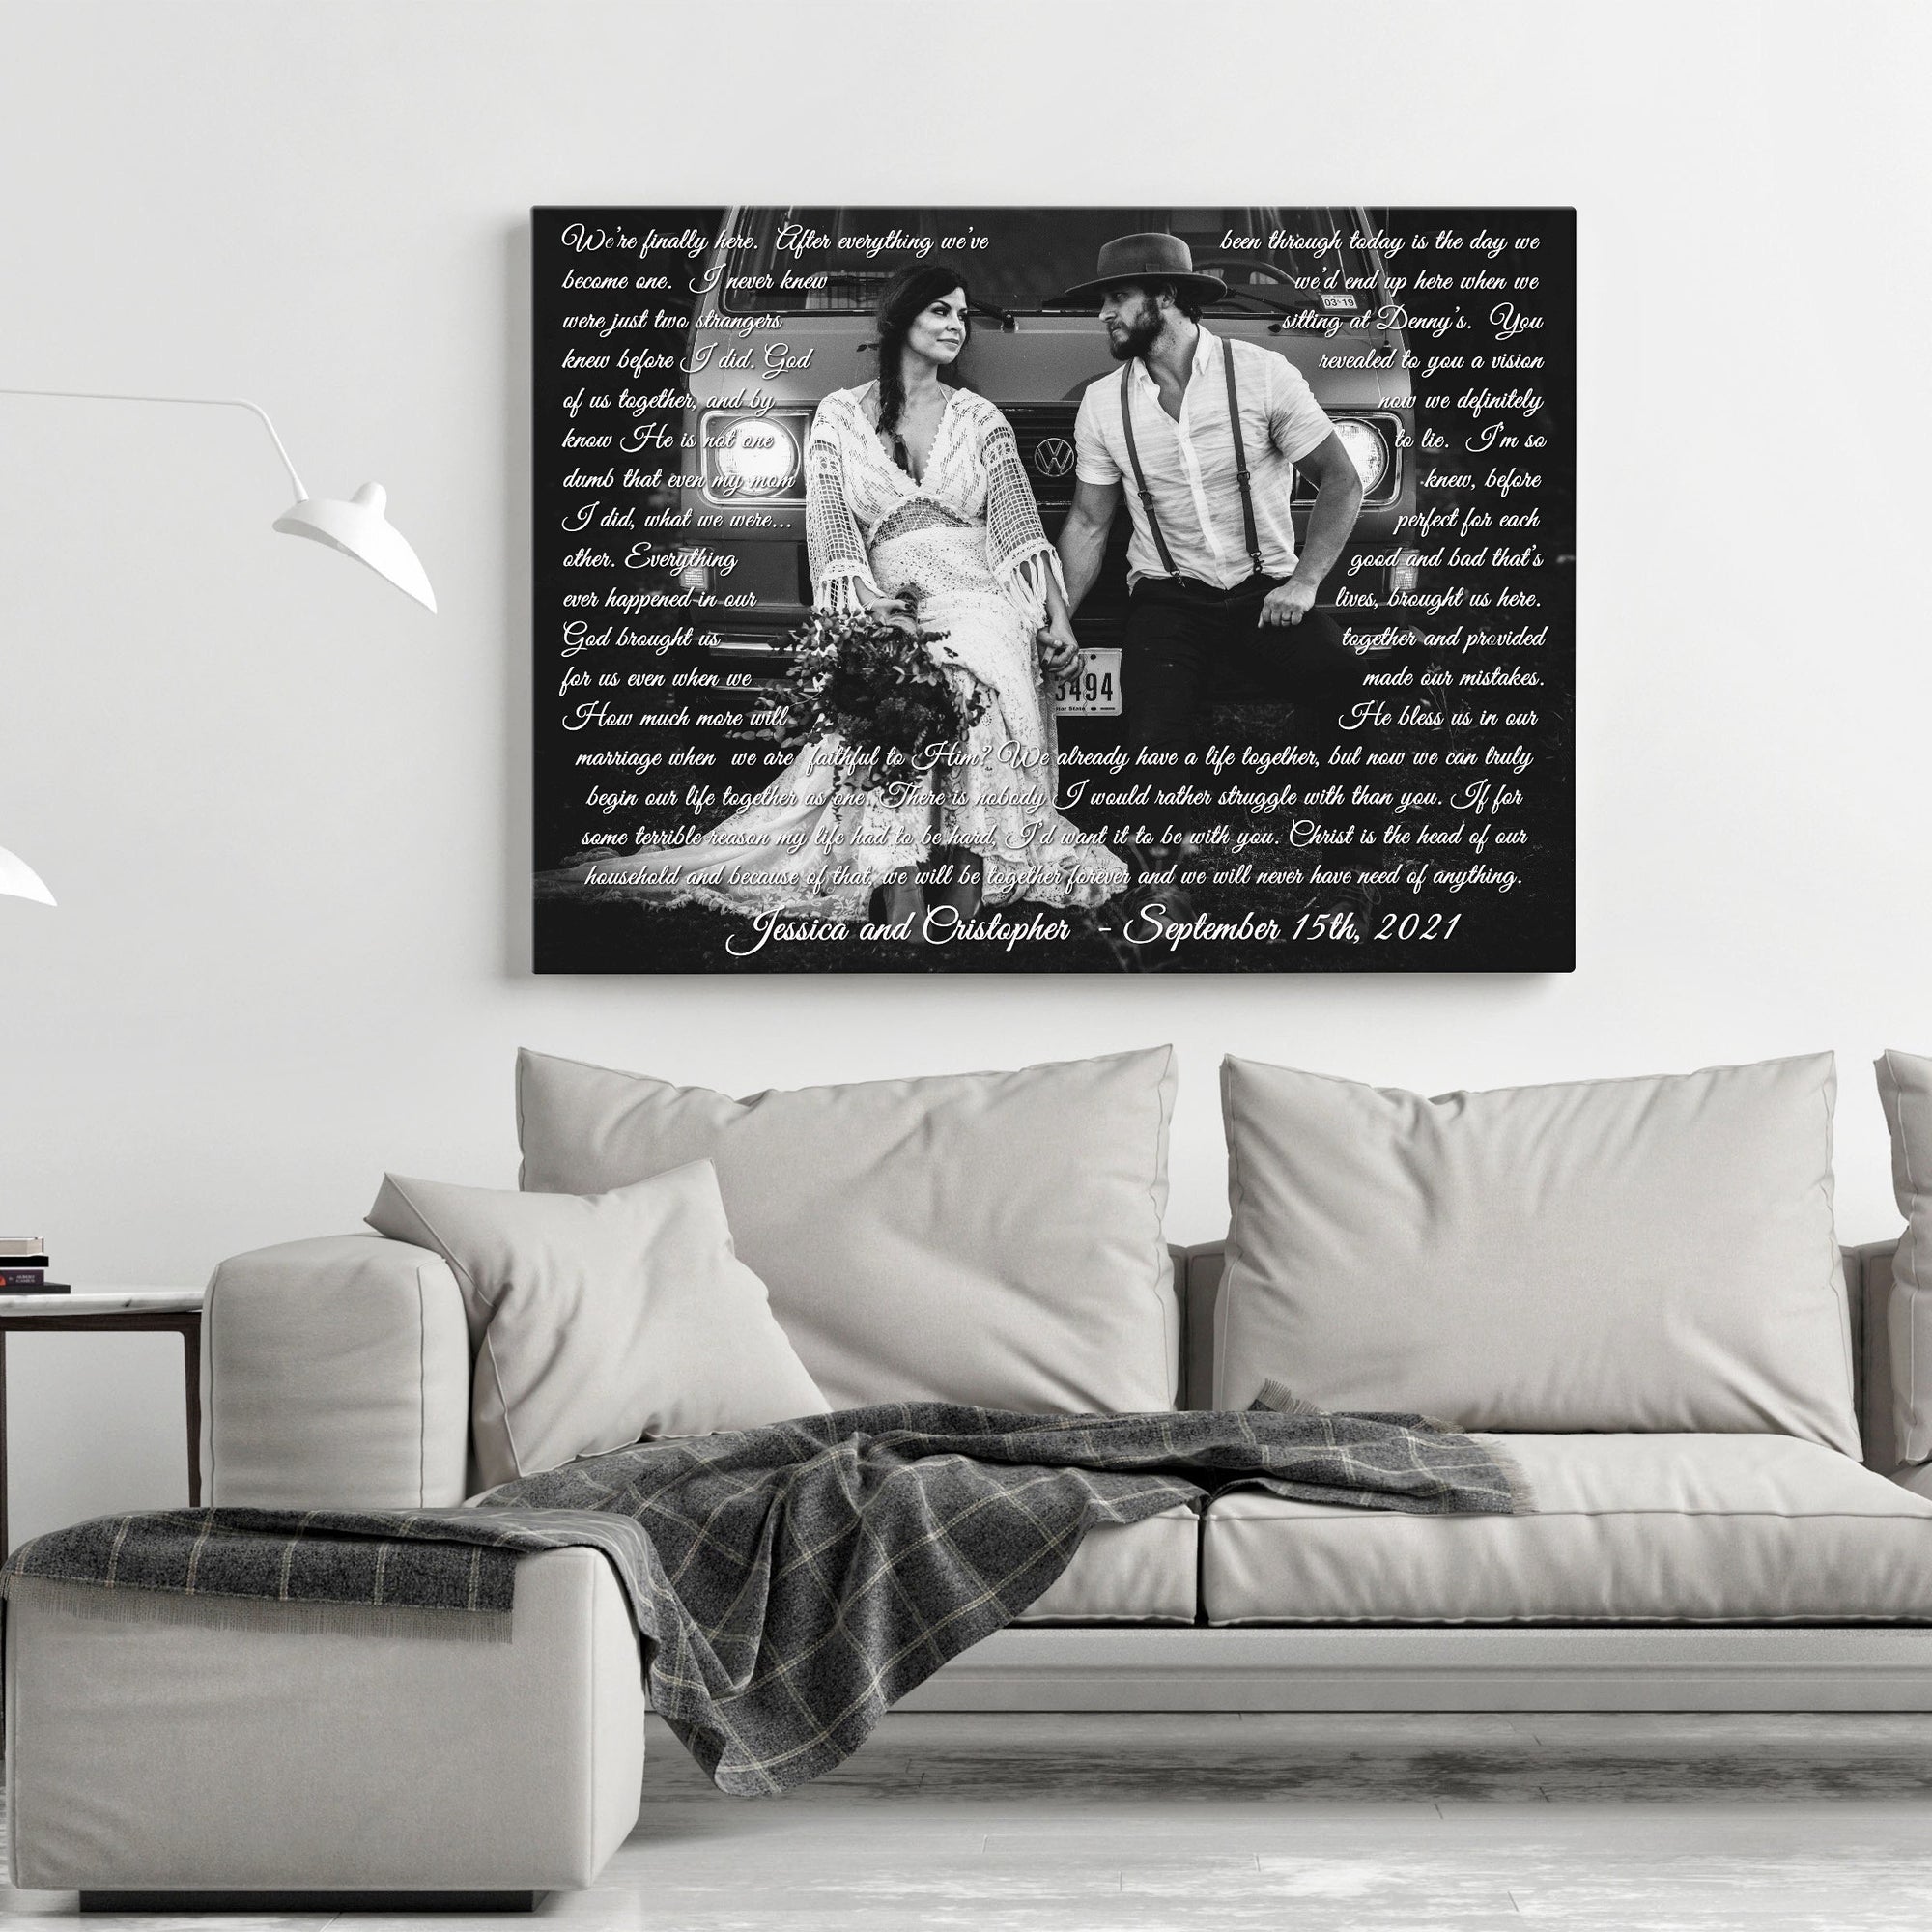 Just the Two of Us Print Home Decor Wall Art Bedroom Print 